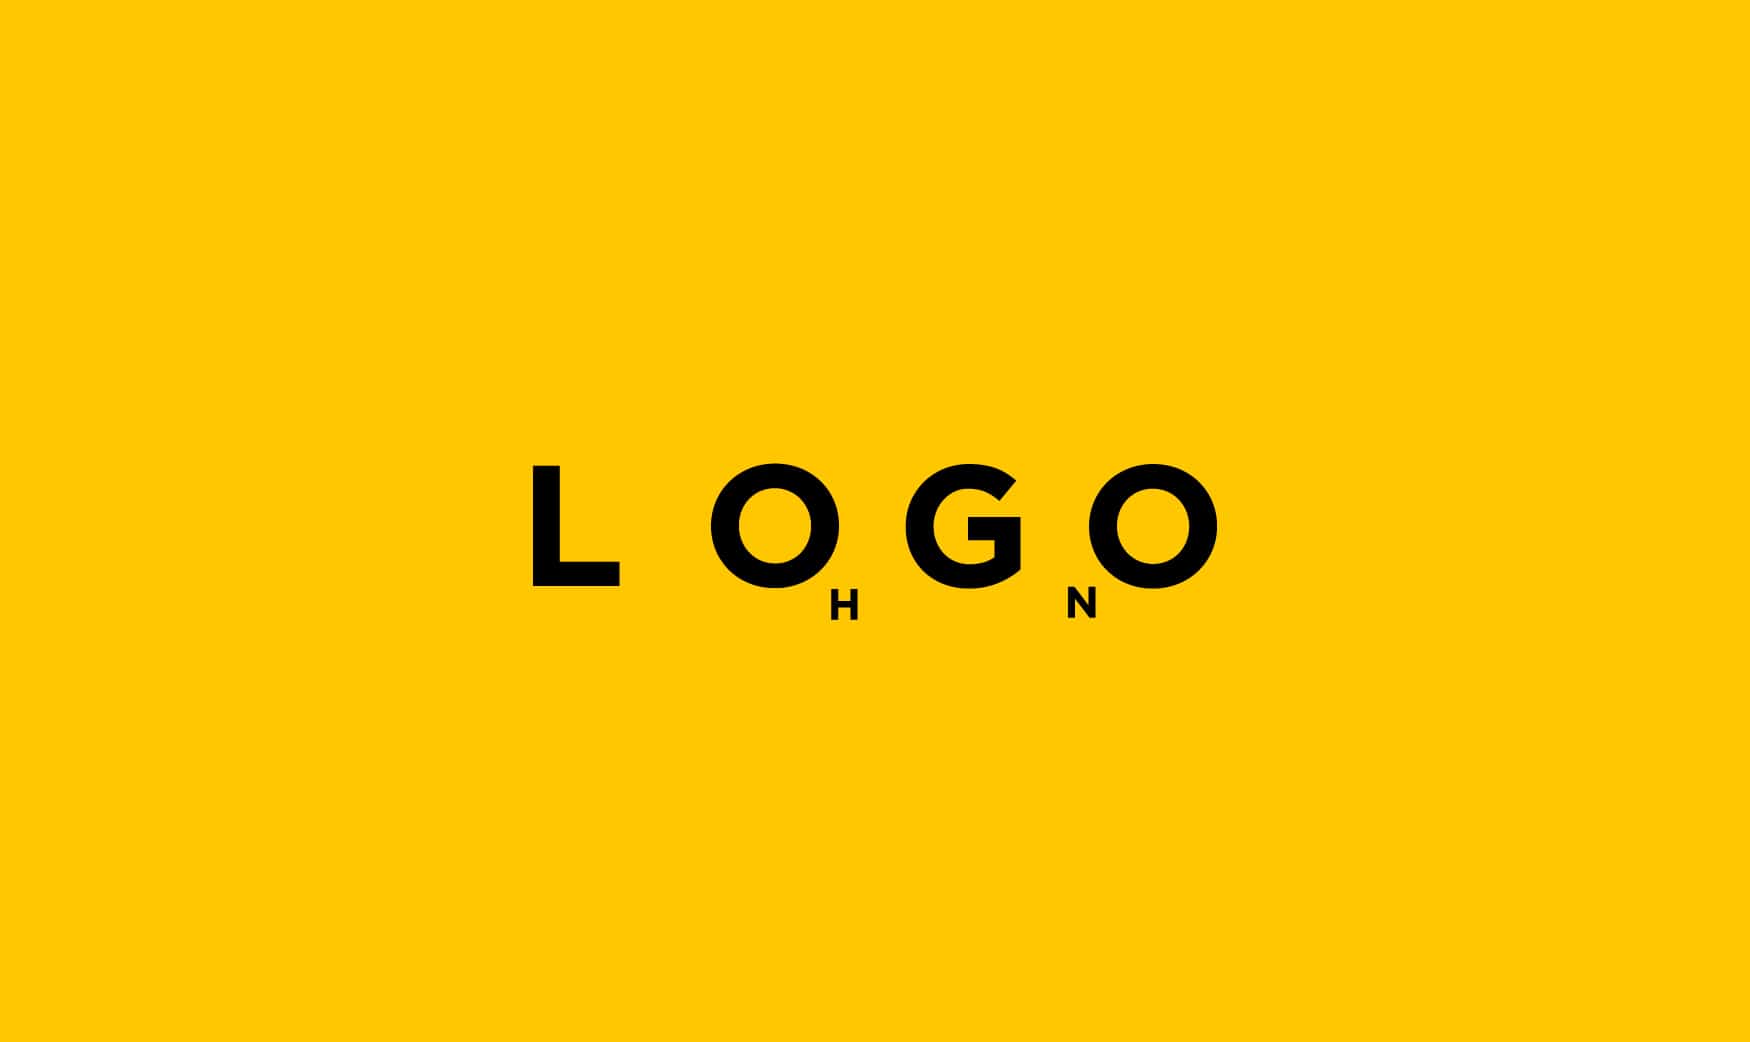 How not to design a logo- 5 common mistakes & how to fix them